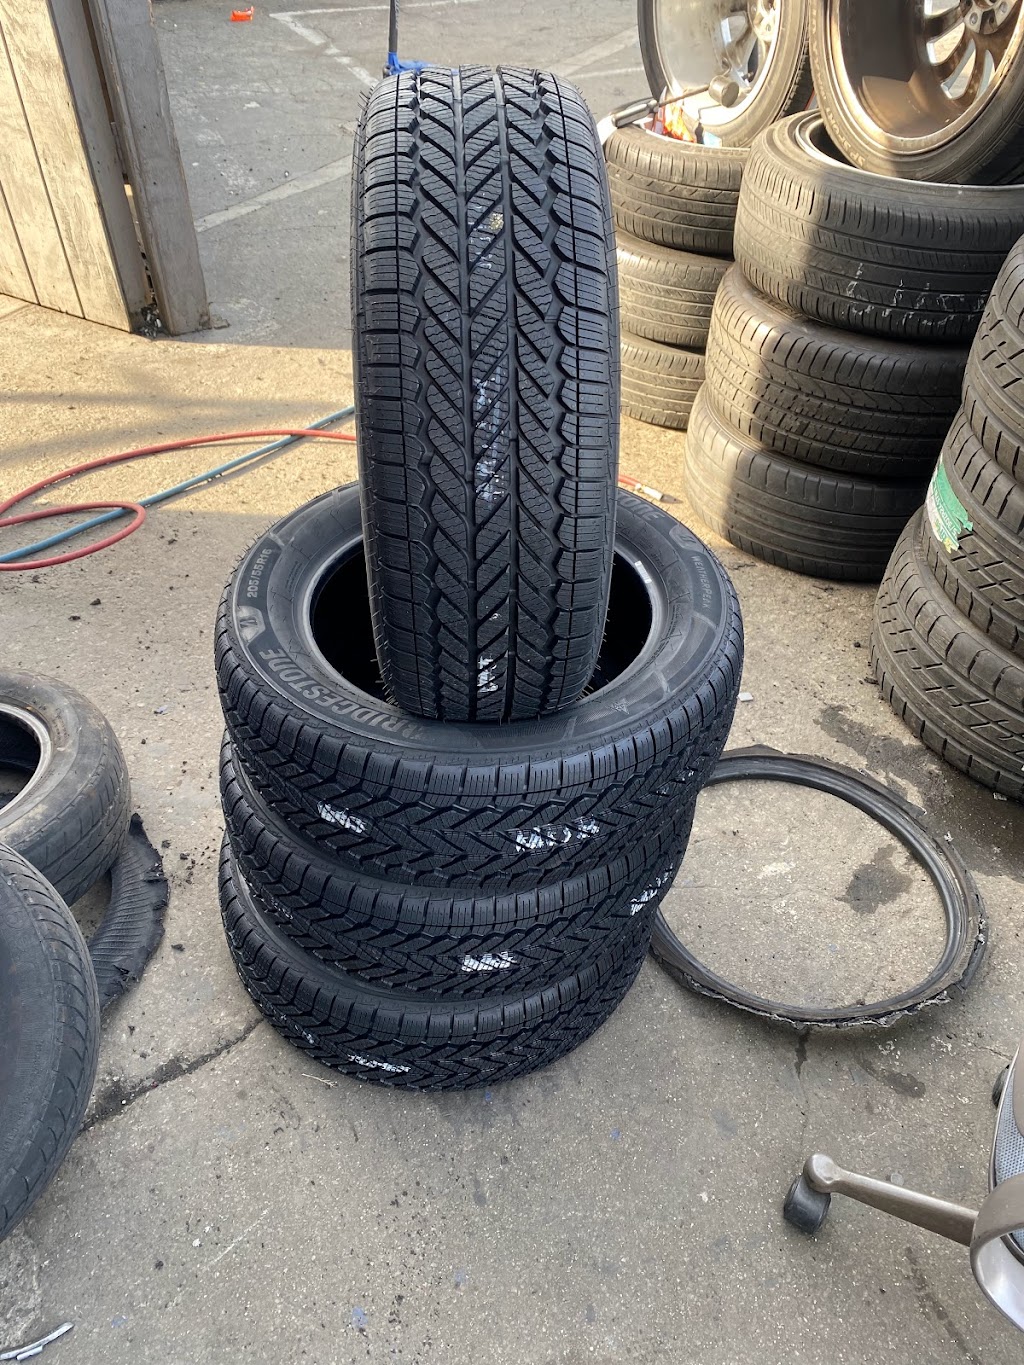 Mobile tires and break service | 2806 Adeline St, Oakland, CA 94608 | Phone: (925) 348-7609